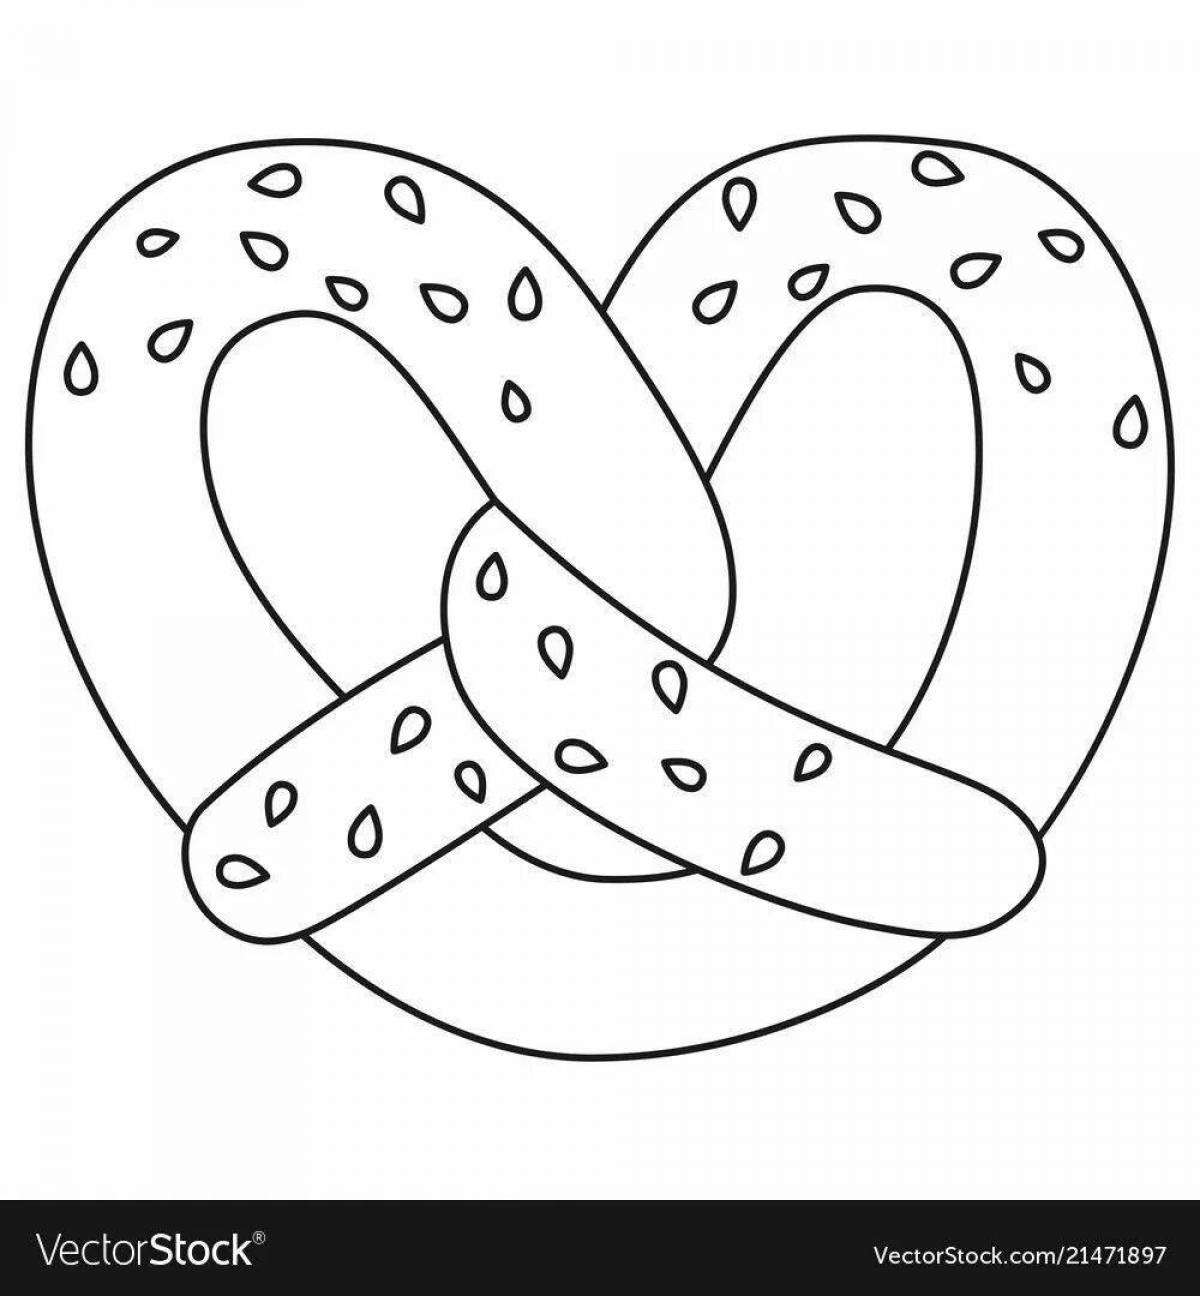 Colored donut coloring page with donuts